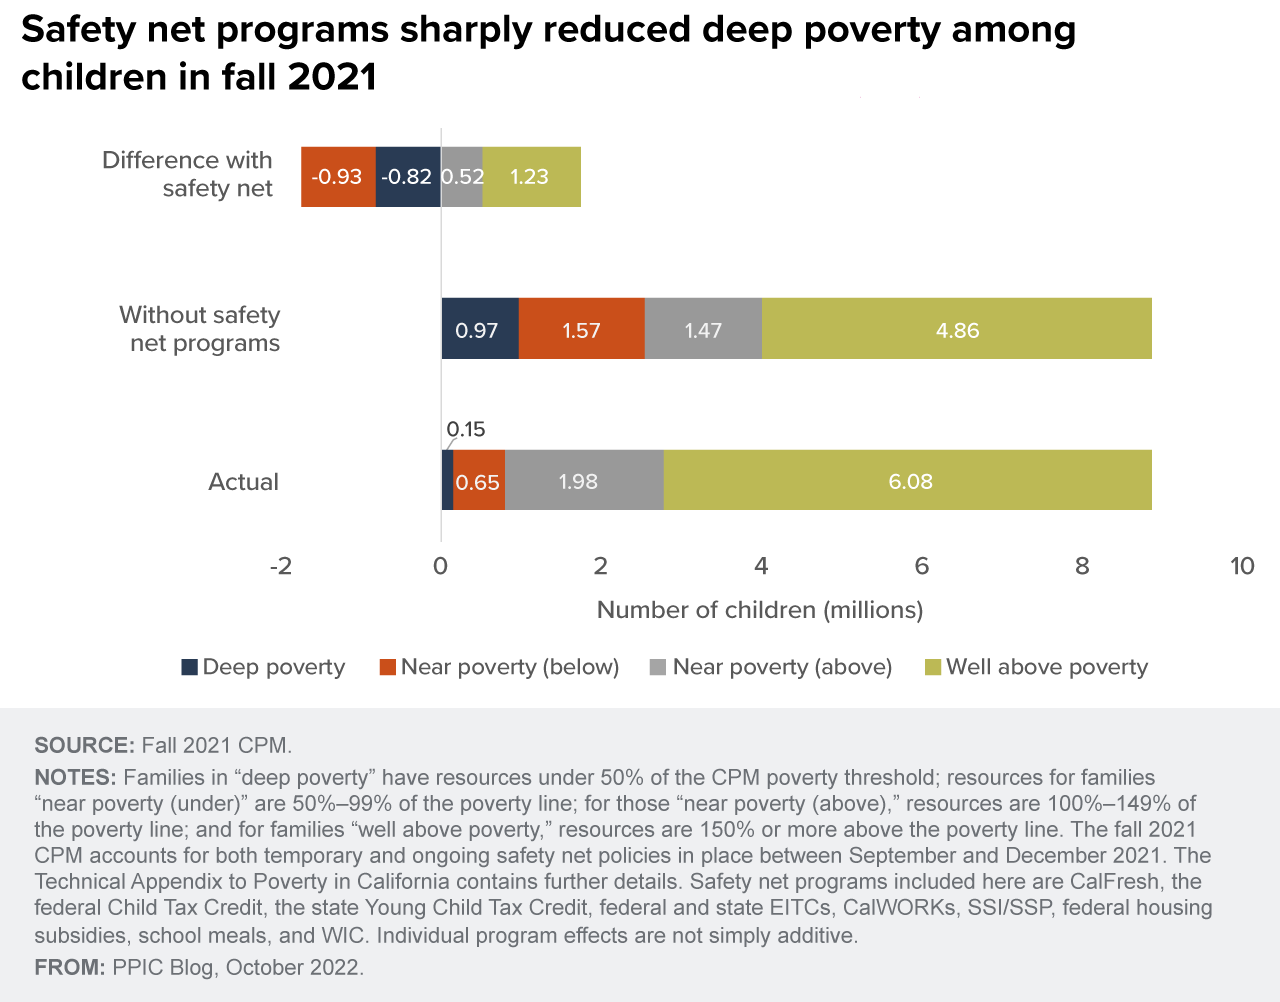 figure - Safety net programs sharply reduced deep poverty among children in fall 2021